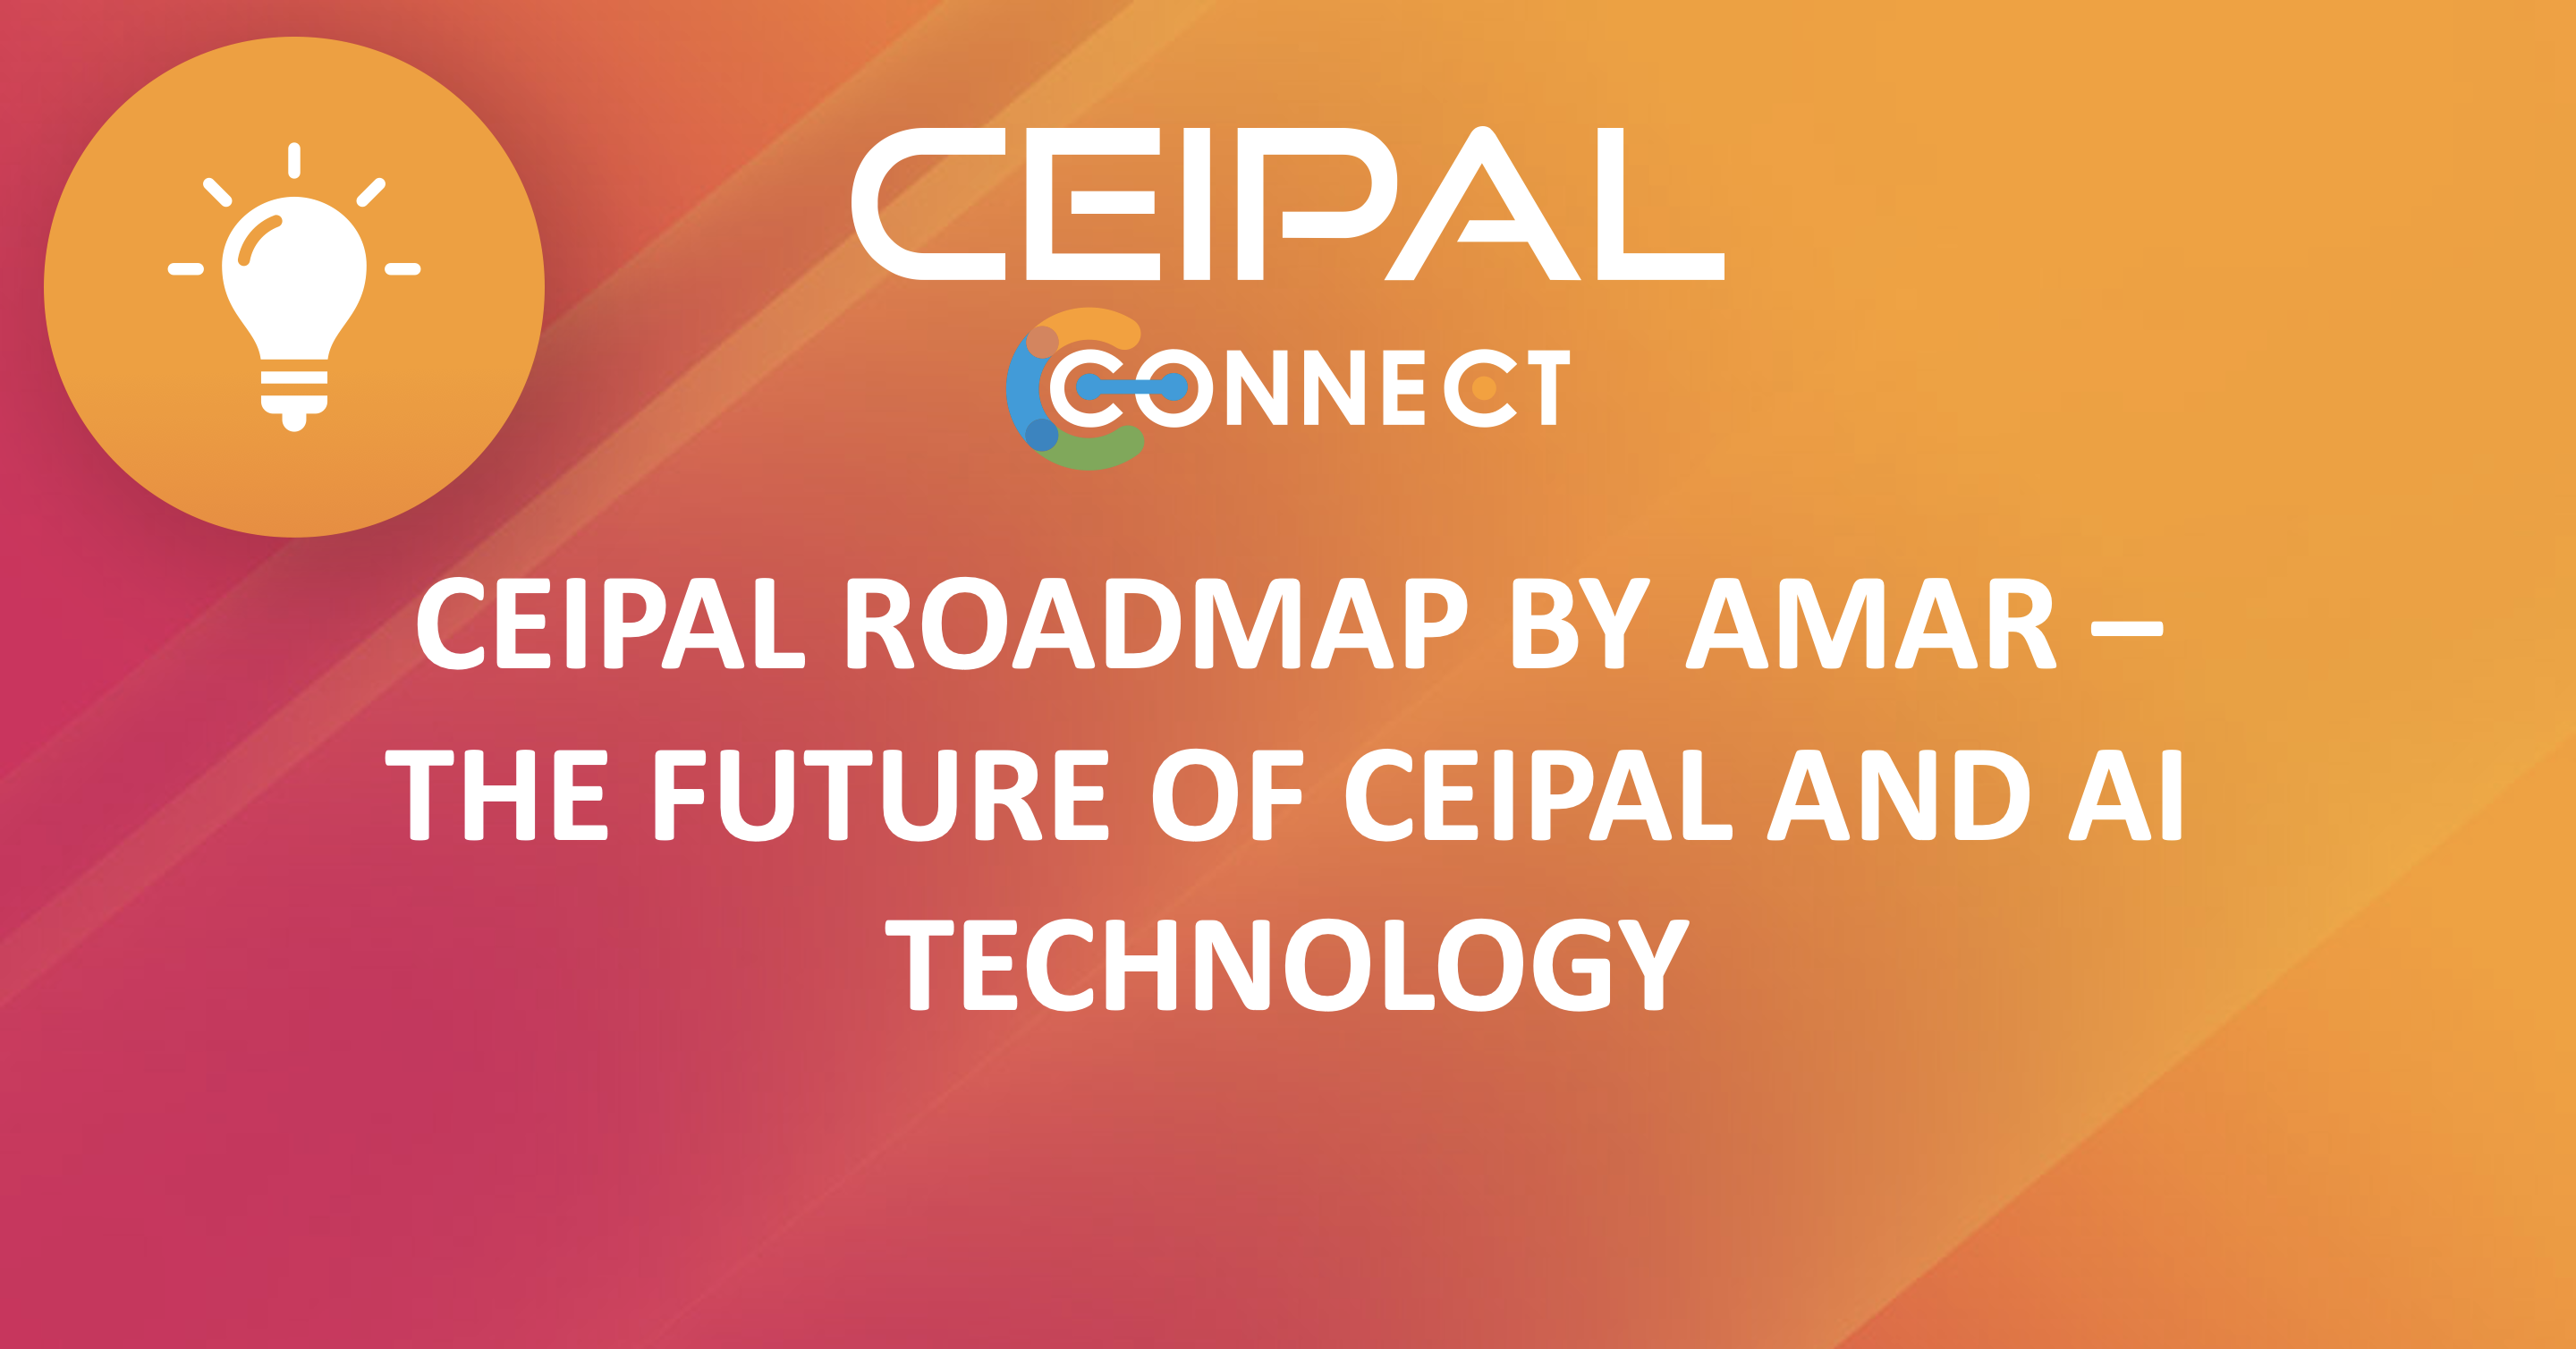 Ceipal Roadmap by Amar – The Future of Ceipal and AI Technology